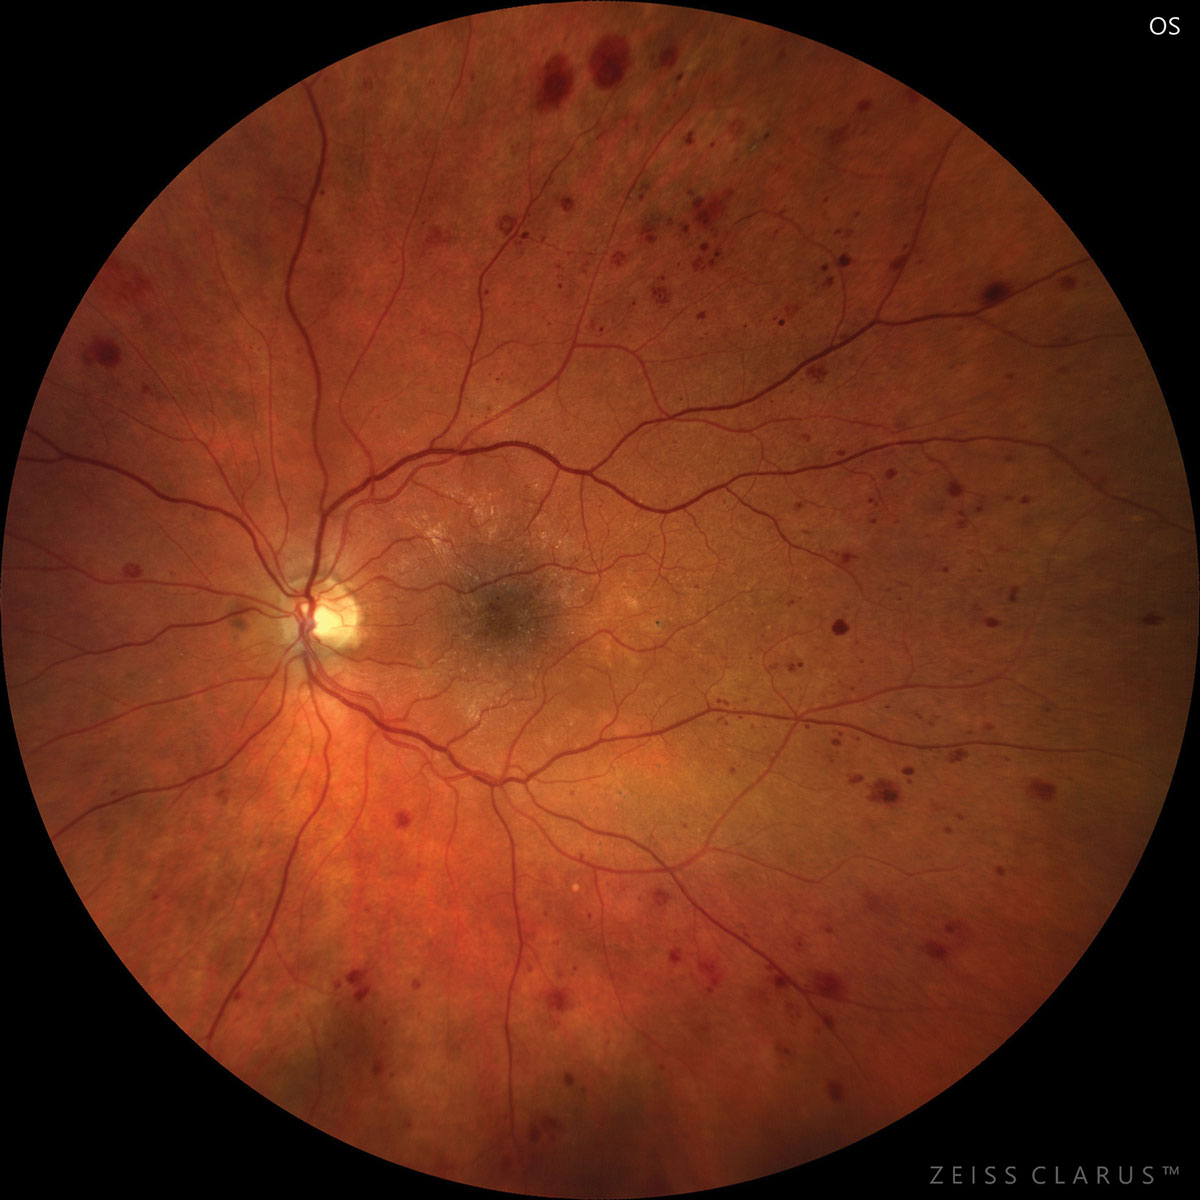 Retinal neurodegeneration was to some extent affected by obesity and related metabolic disturbances.